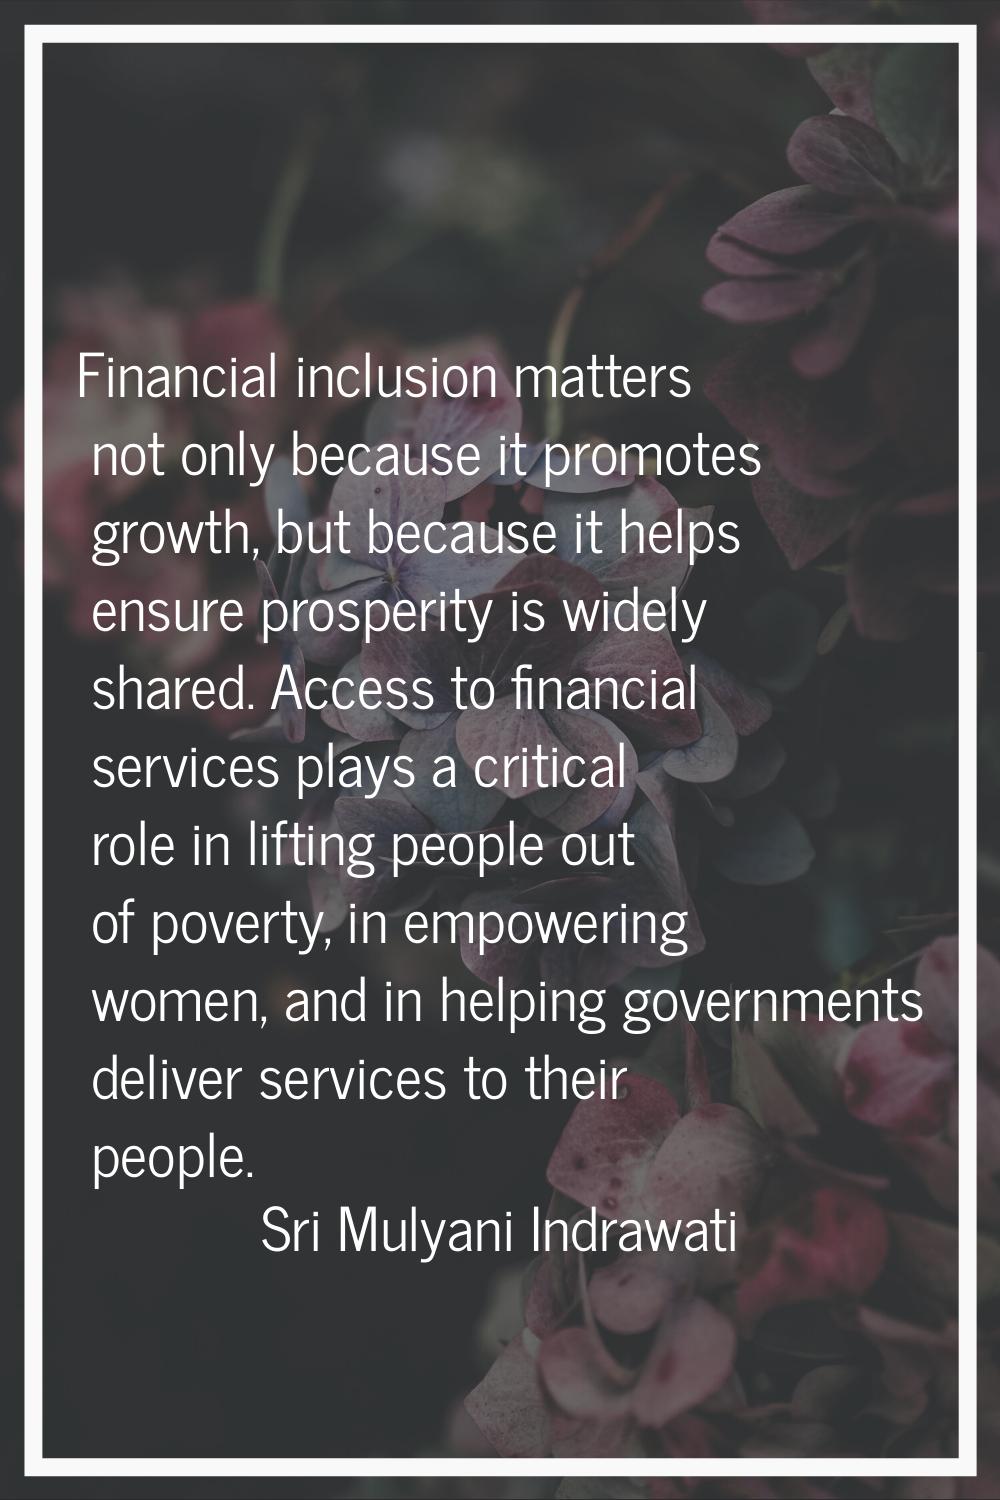 Financial inclusion matters not only because it promotes growth, but because it helps ensure prospe